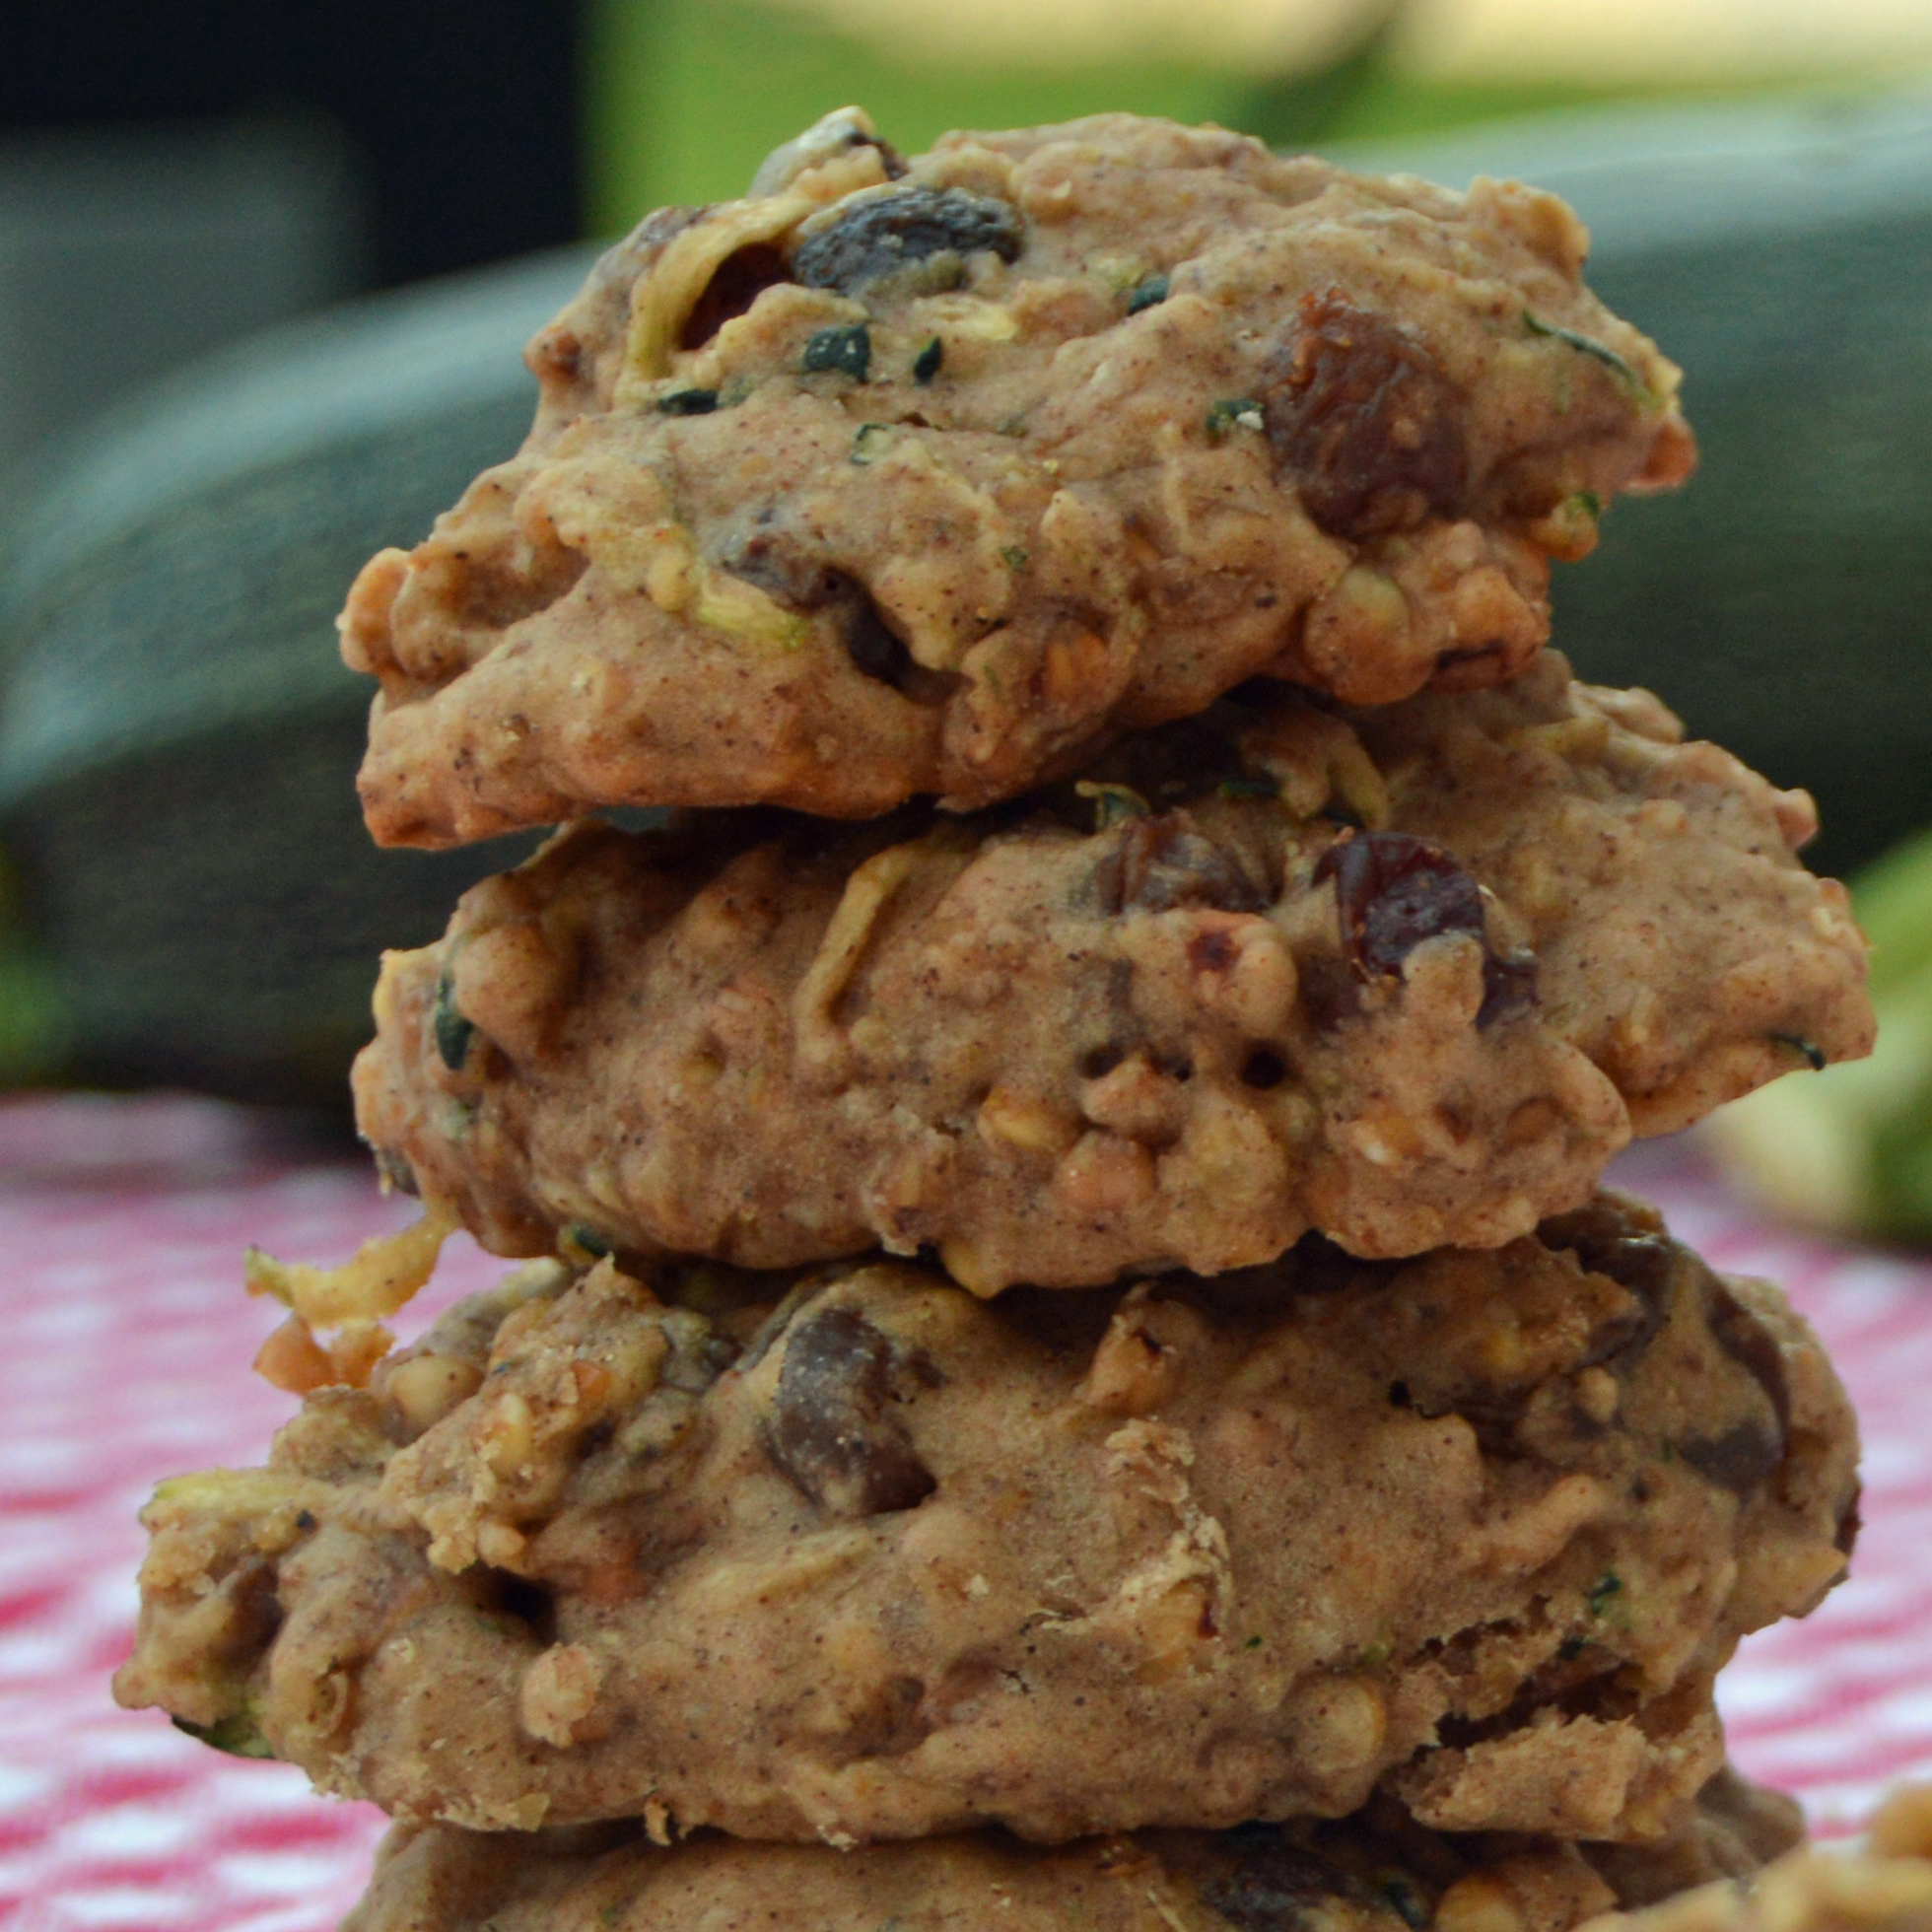 Grill-Baked Zucchini Cookies (gluten free, vegan, top 8 free, allergy friendly)